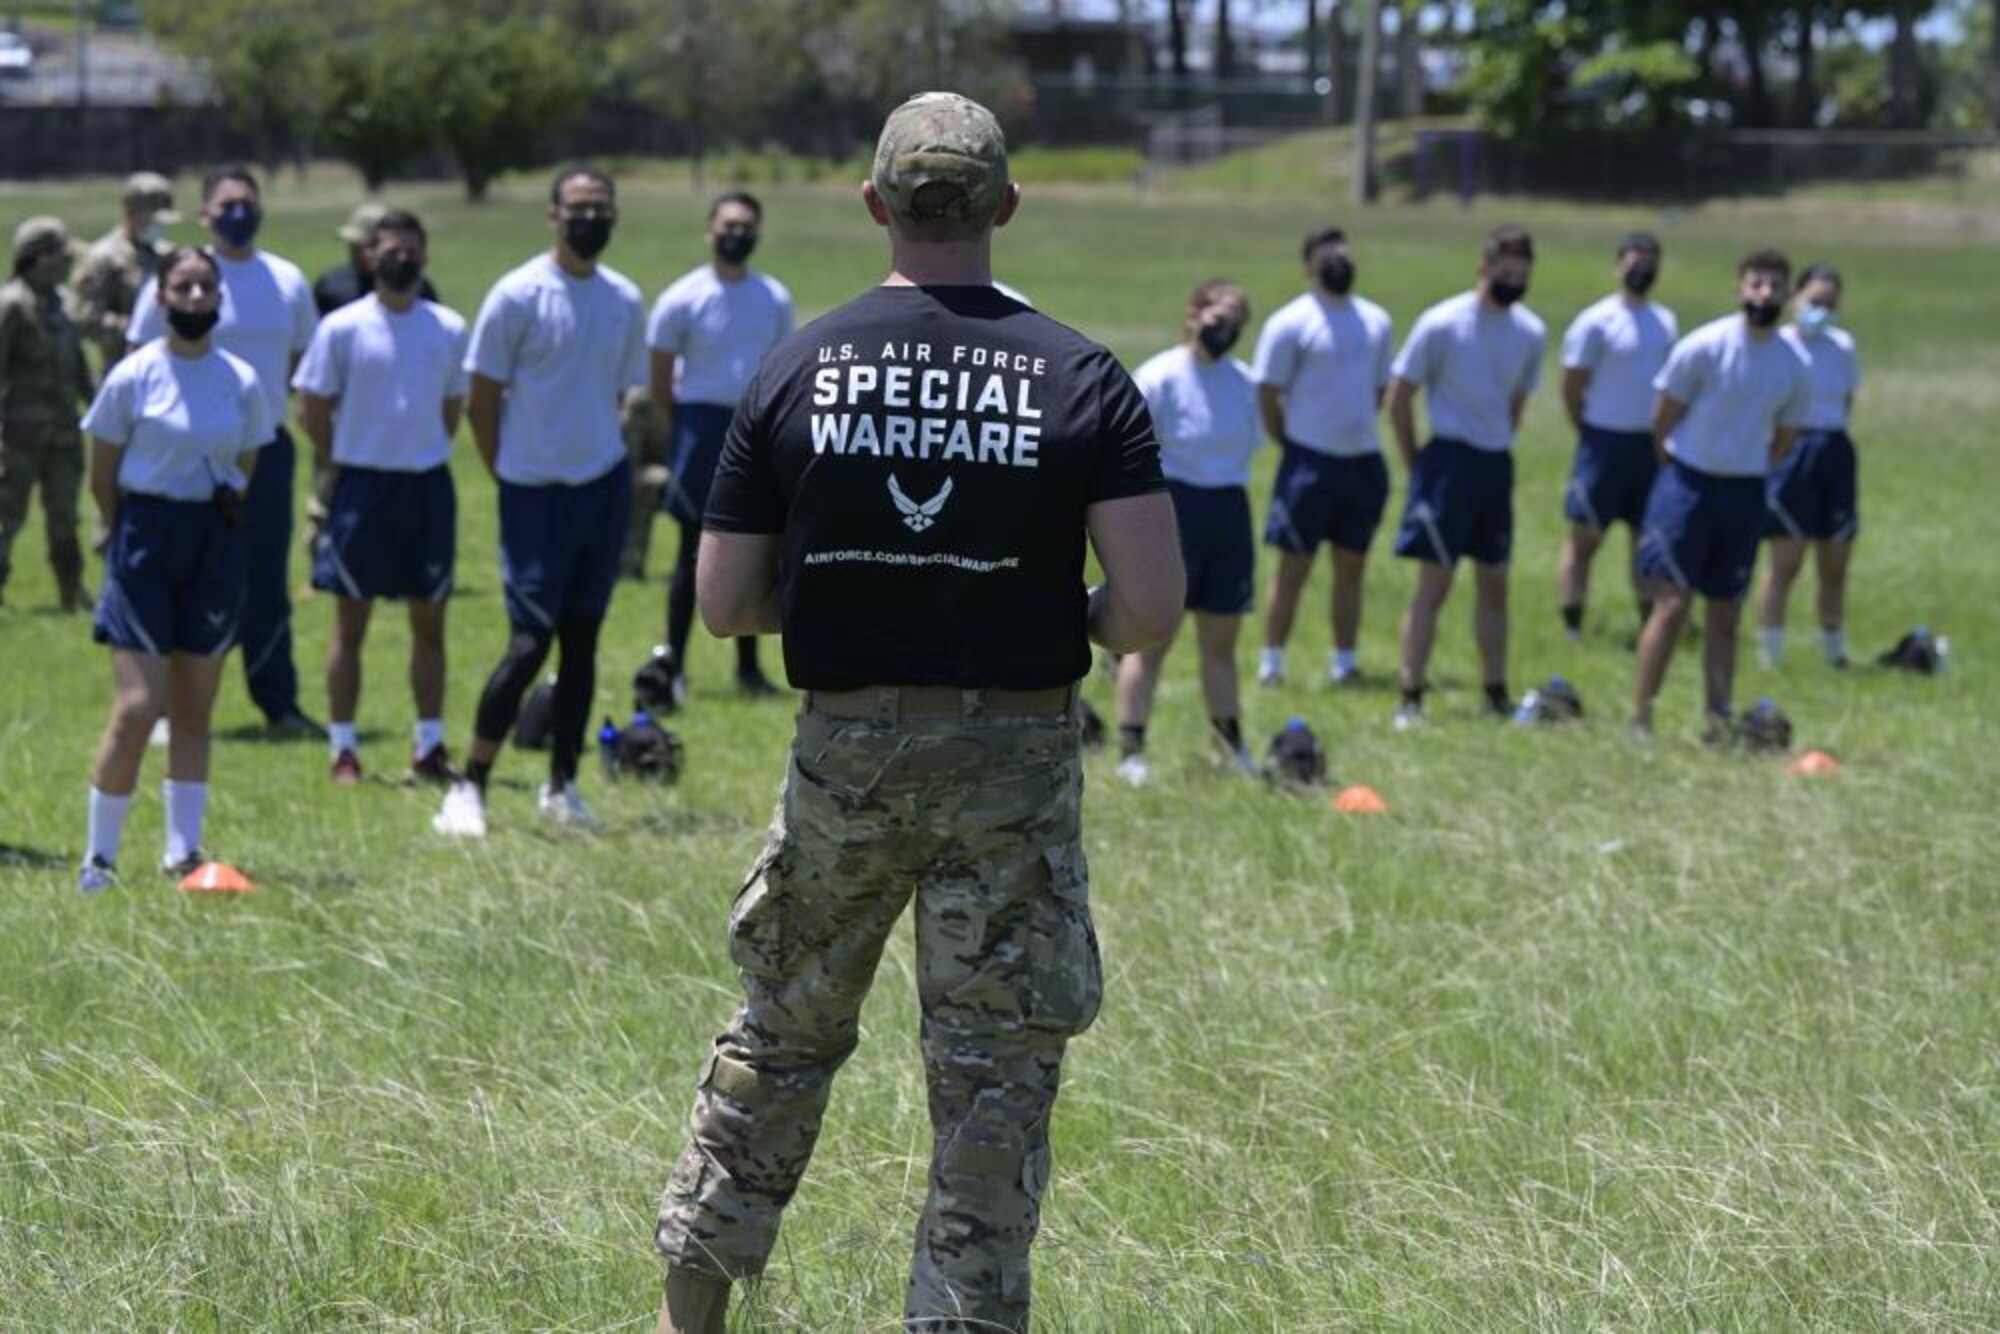 U.S. Air Force Master Sgt. James Robison, 330th Recruiting Squadron recruiter, provides instruction to cadets from Air Force ROTC Detachment 756 in Mayaguez, Puerto Rico.